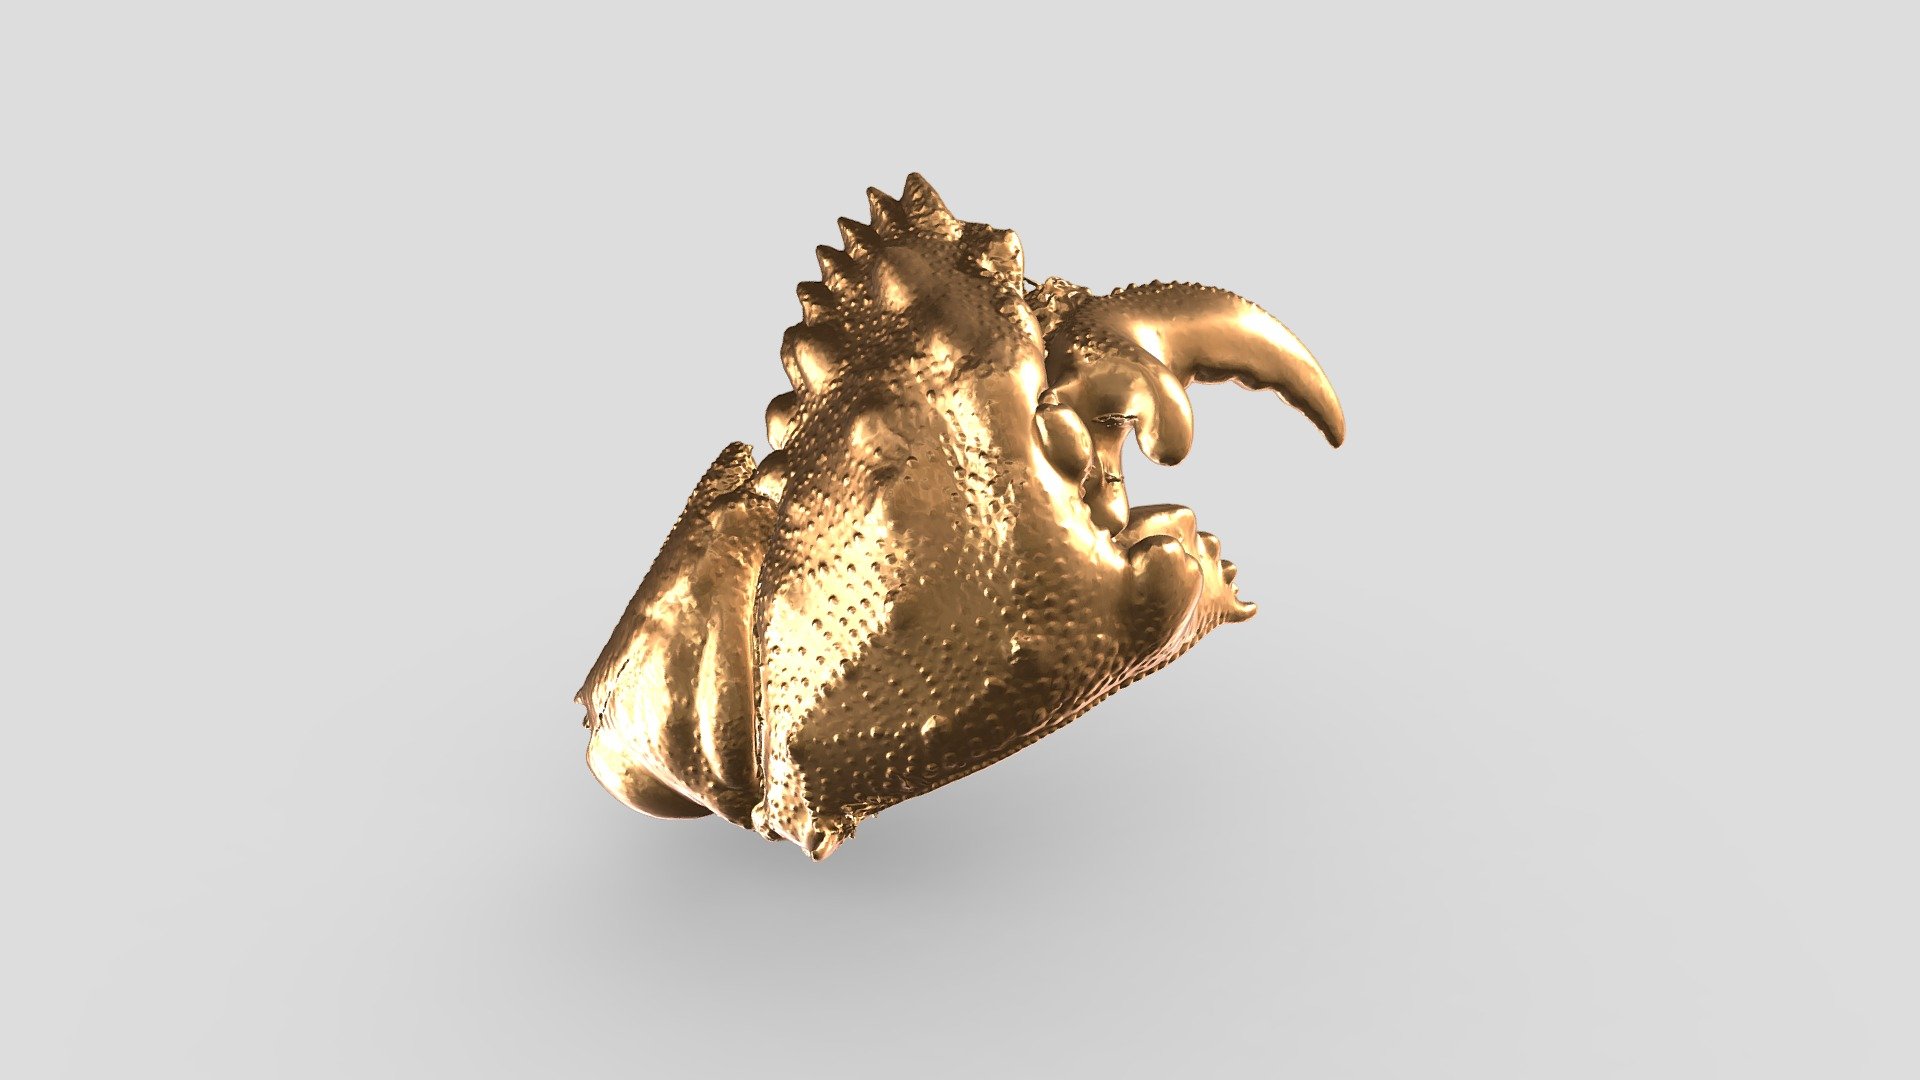 Crab Legs scanning by Thunk3D jewelry 3d scanner

https://www.facebook.com/profile.php?id=100027655718480 - Crab Legs - Download Free 3D model by Diana Liu (@Diana123456) 3d model